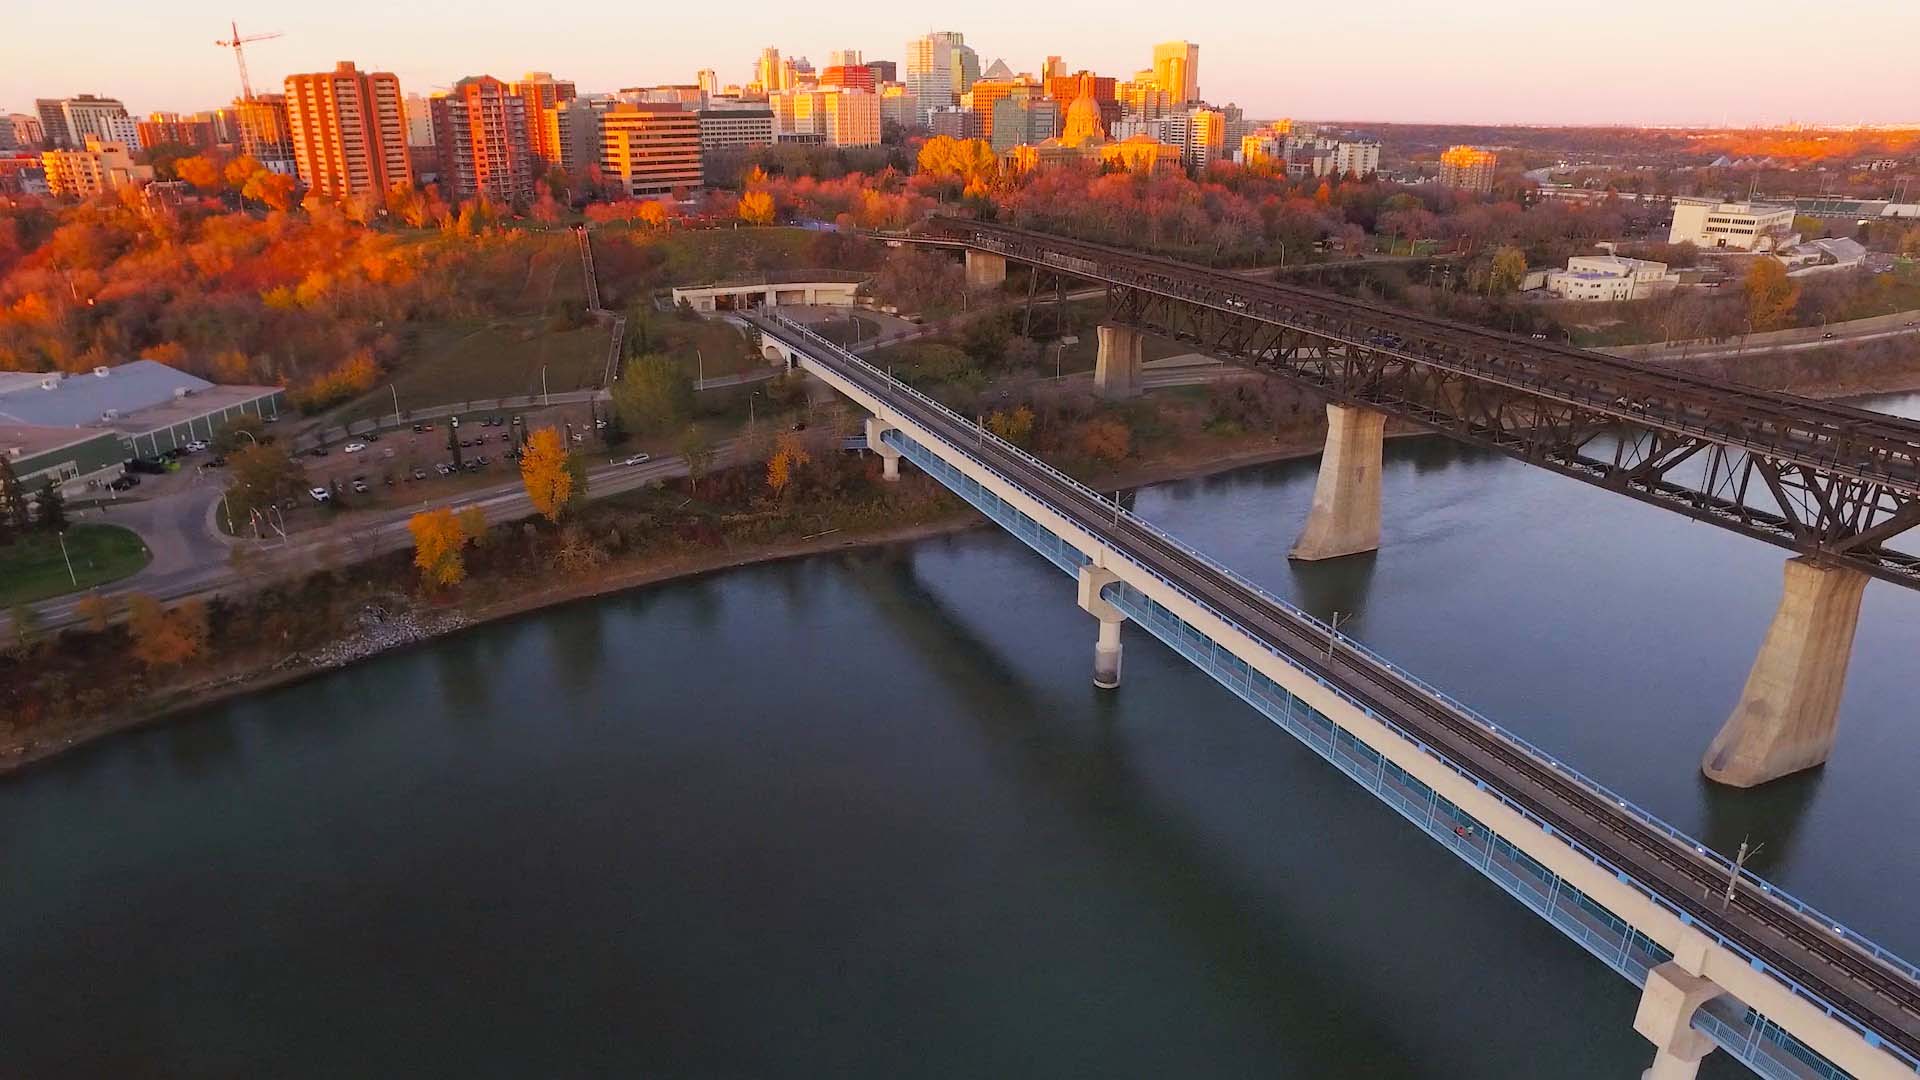 An aerial view of a bridge over a river in edmonton.